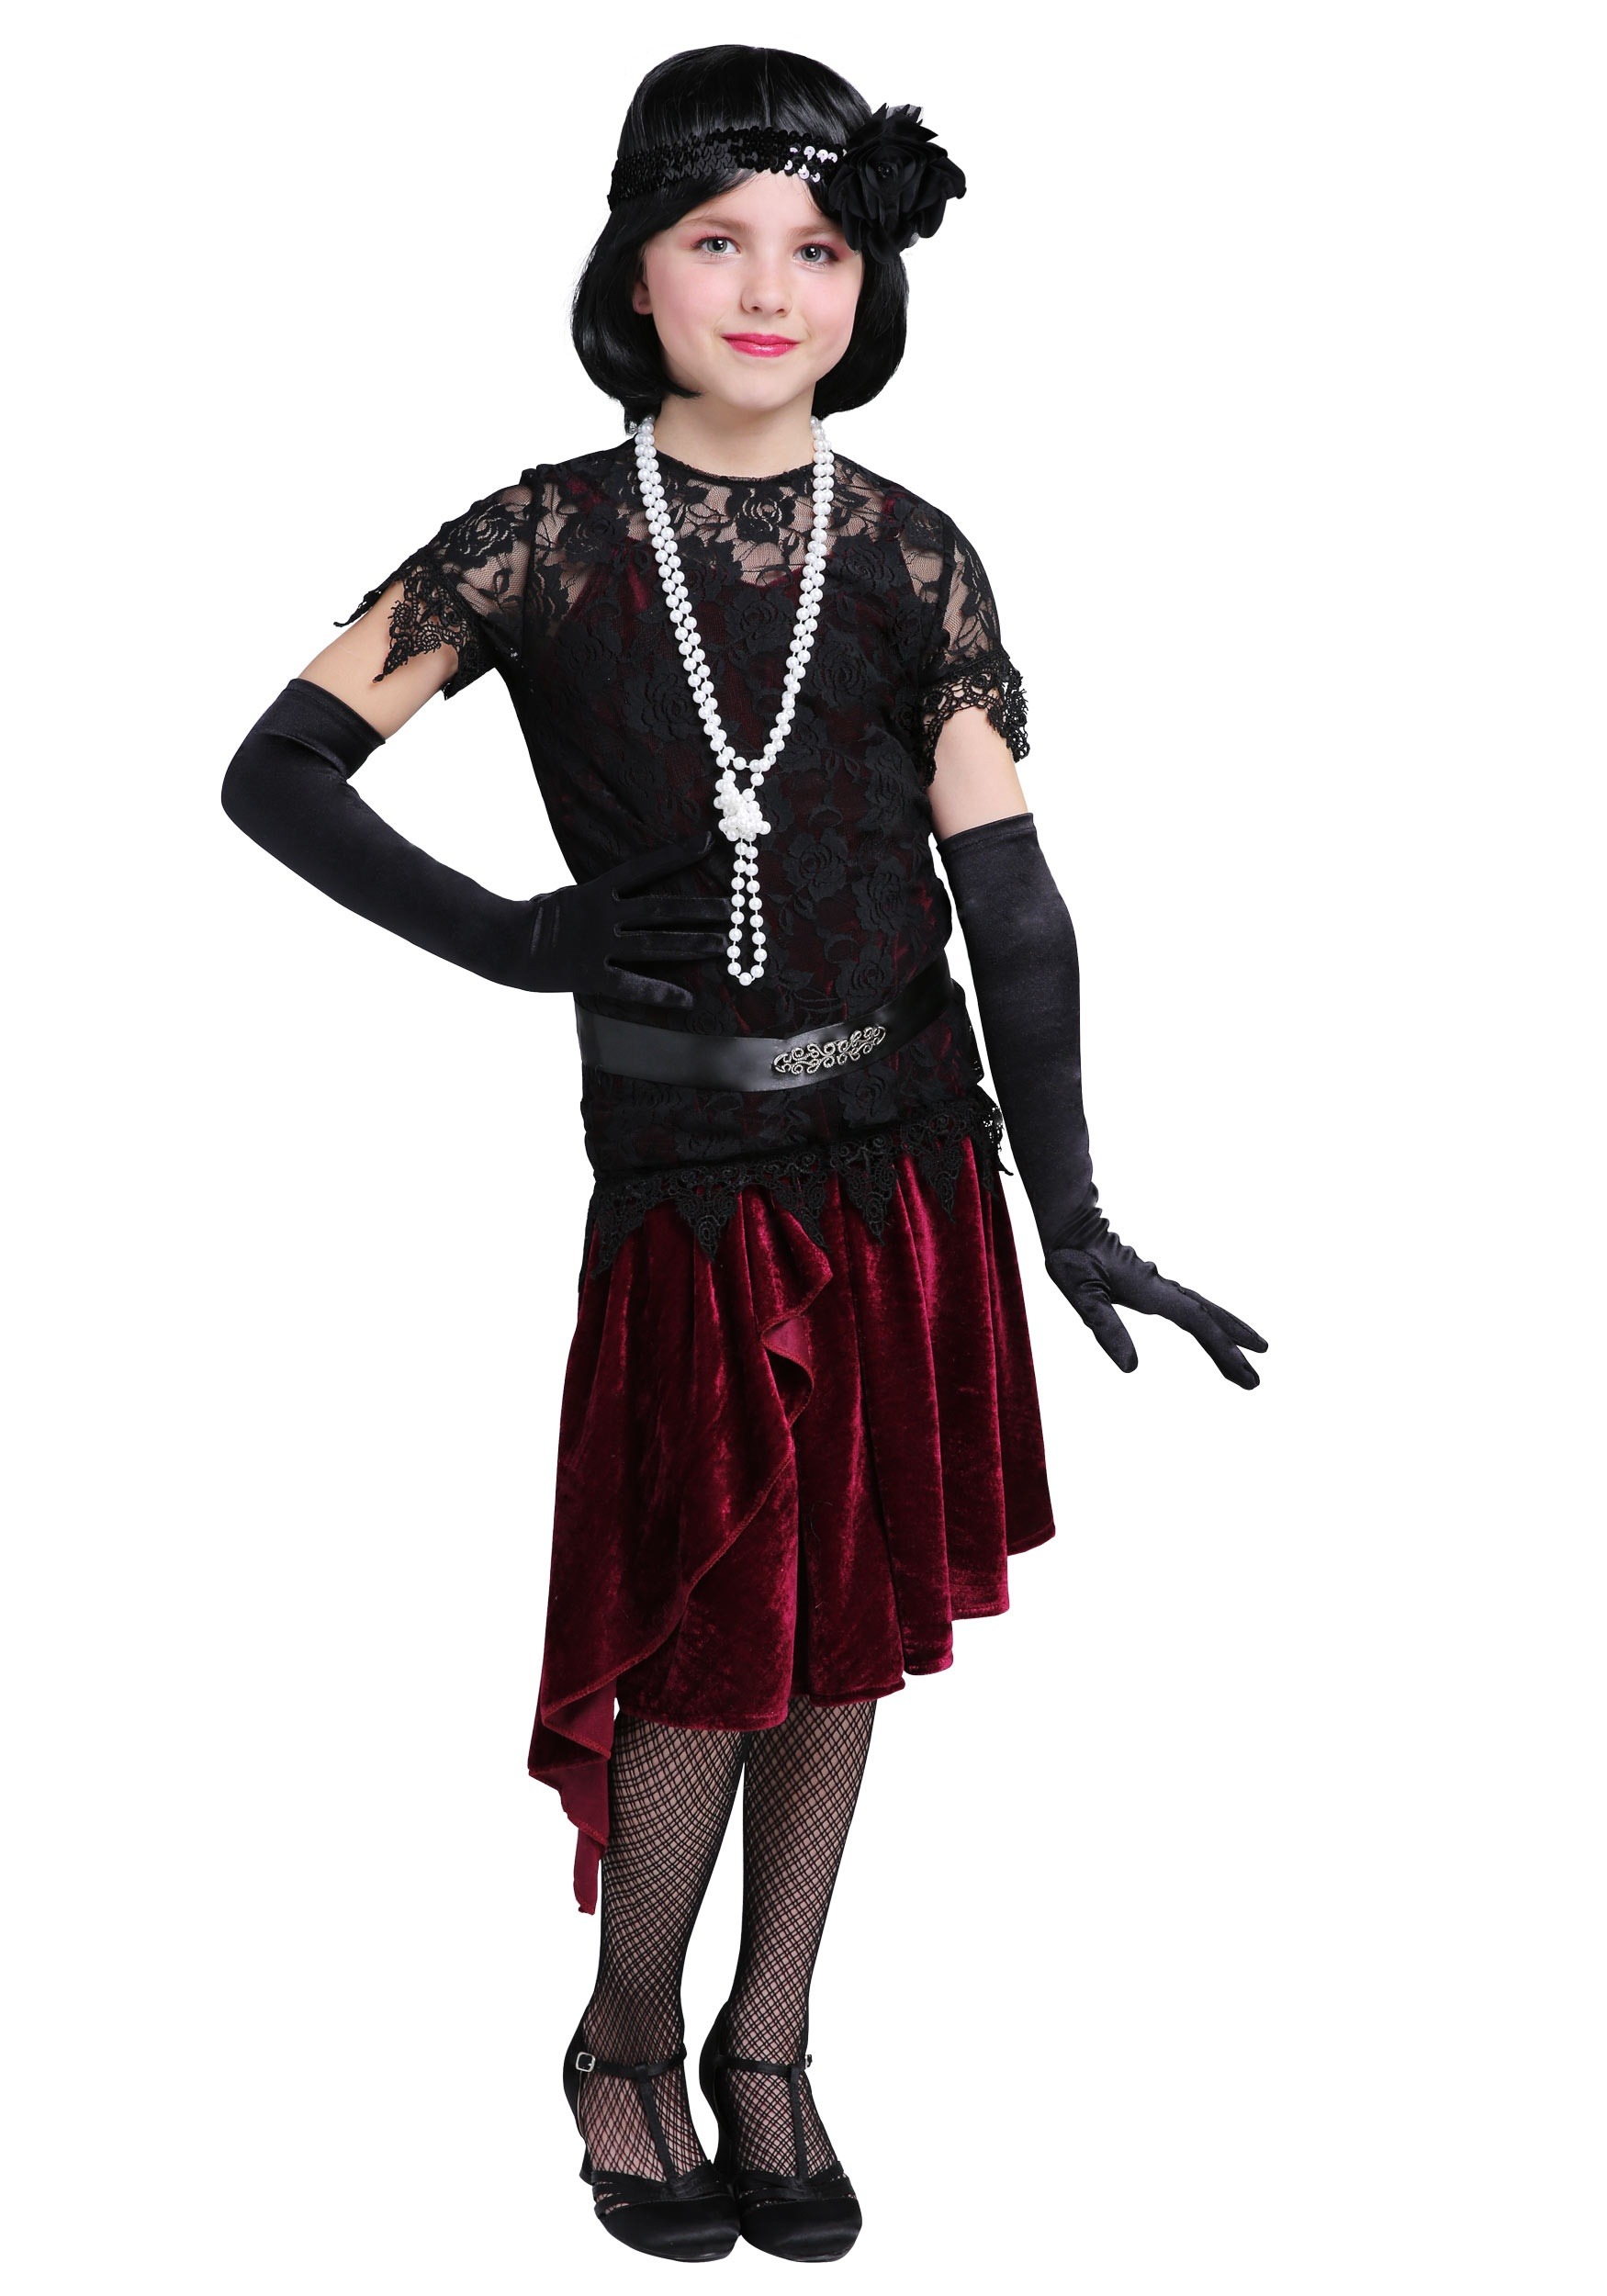 Photos - Fancy Dress FUN Costumes Toe Tappin' Flapper Costume for Girls Black/Red